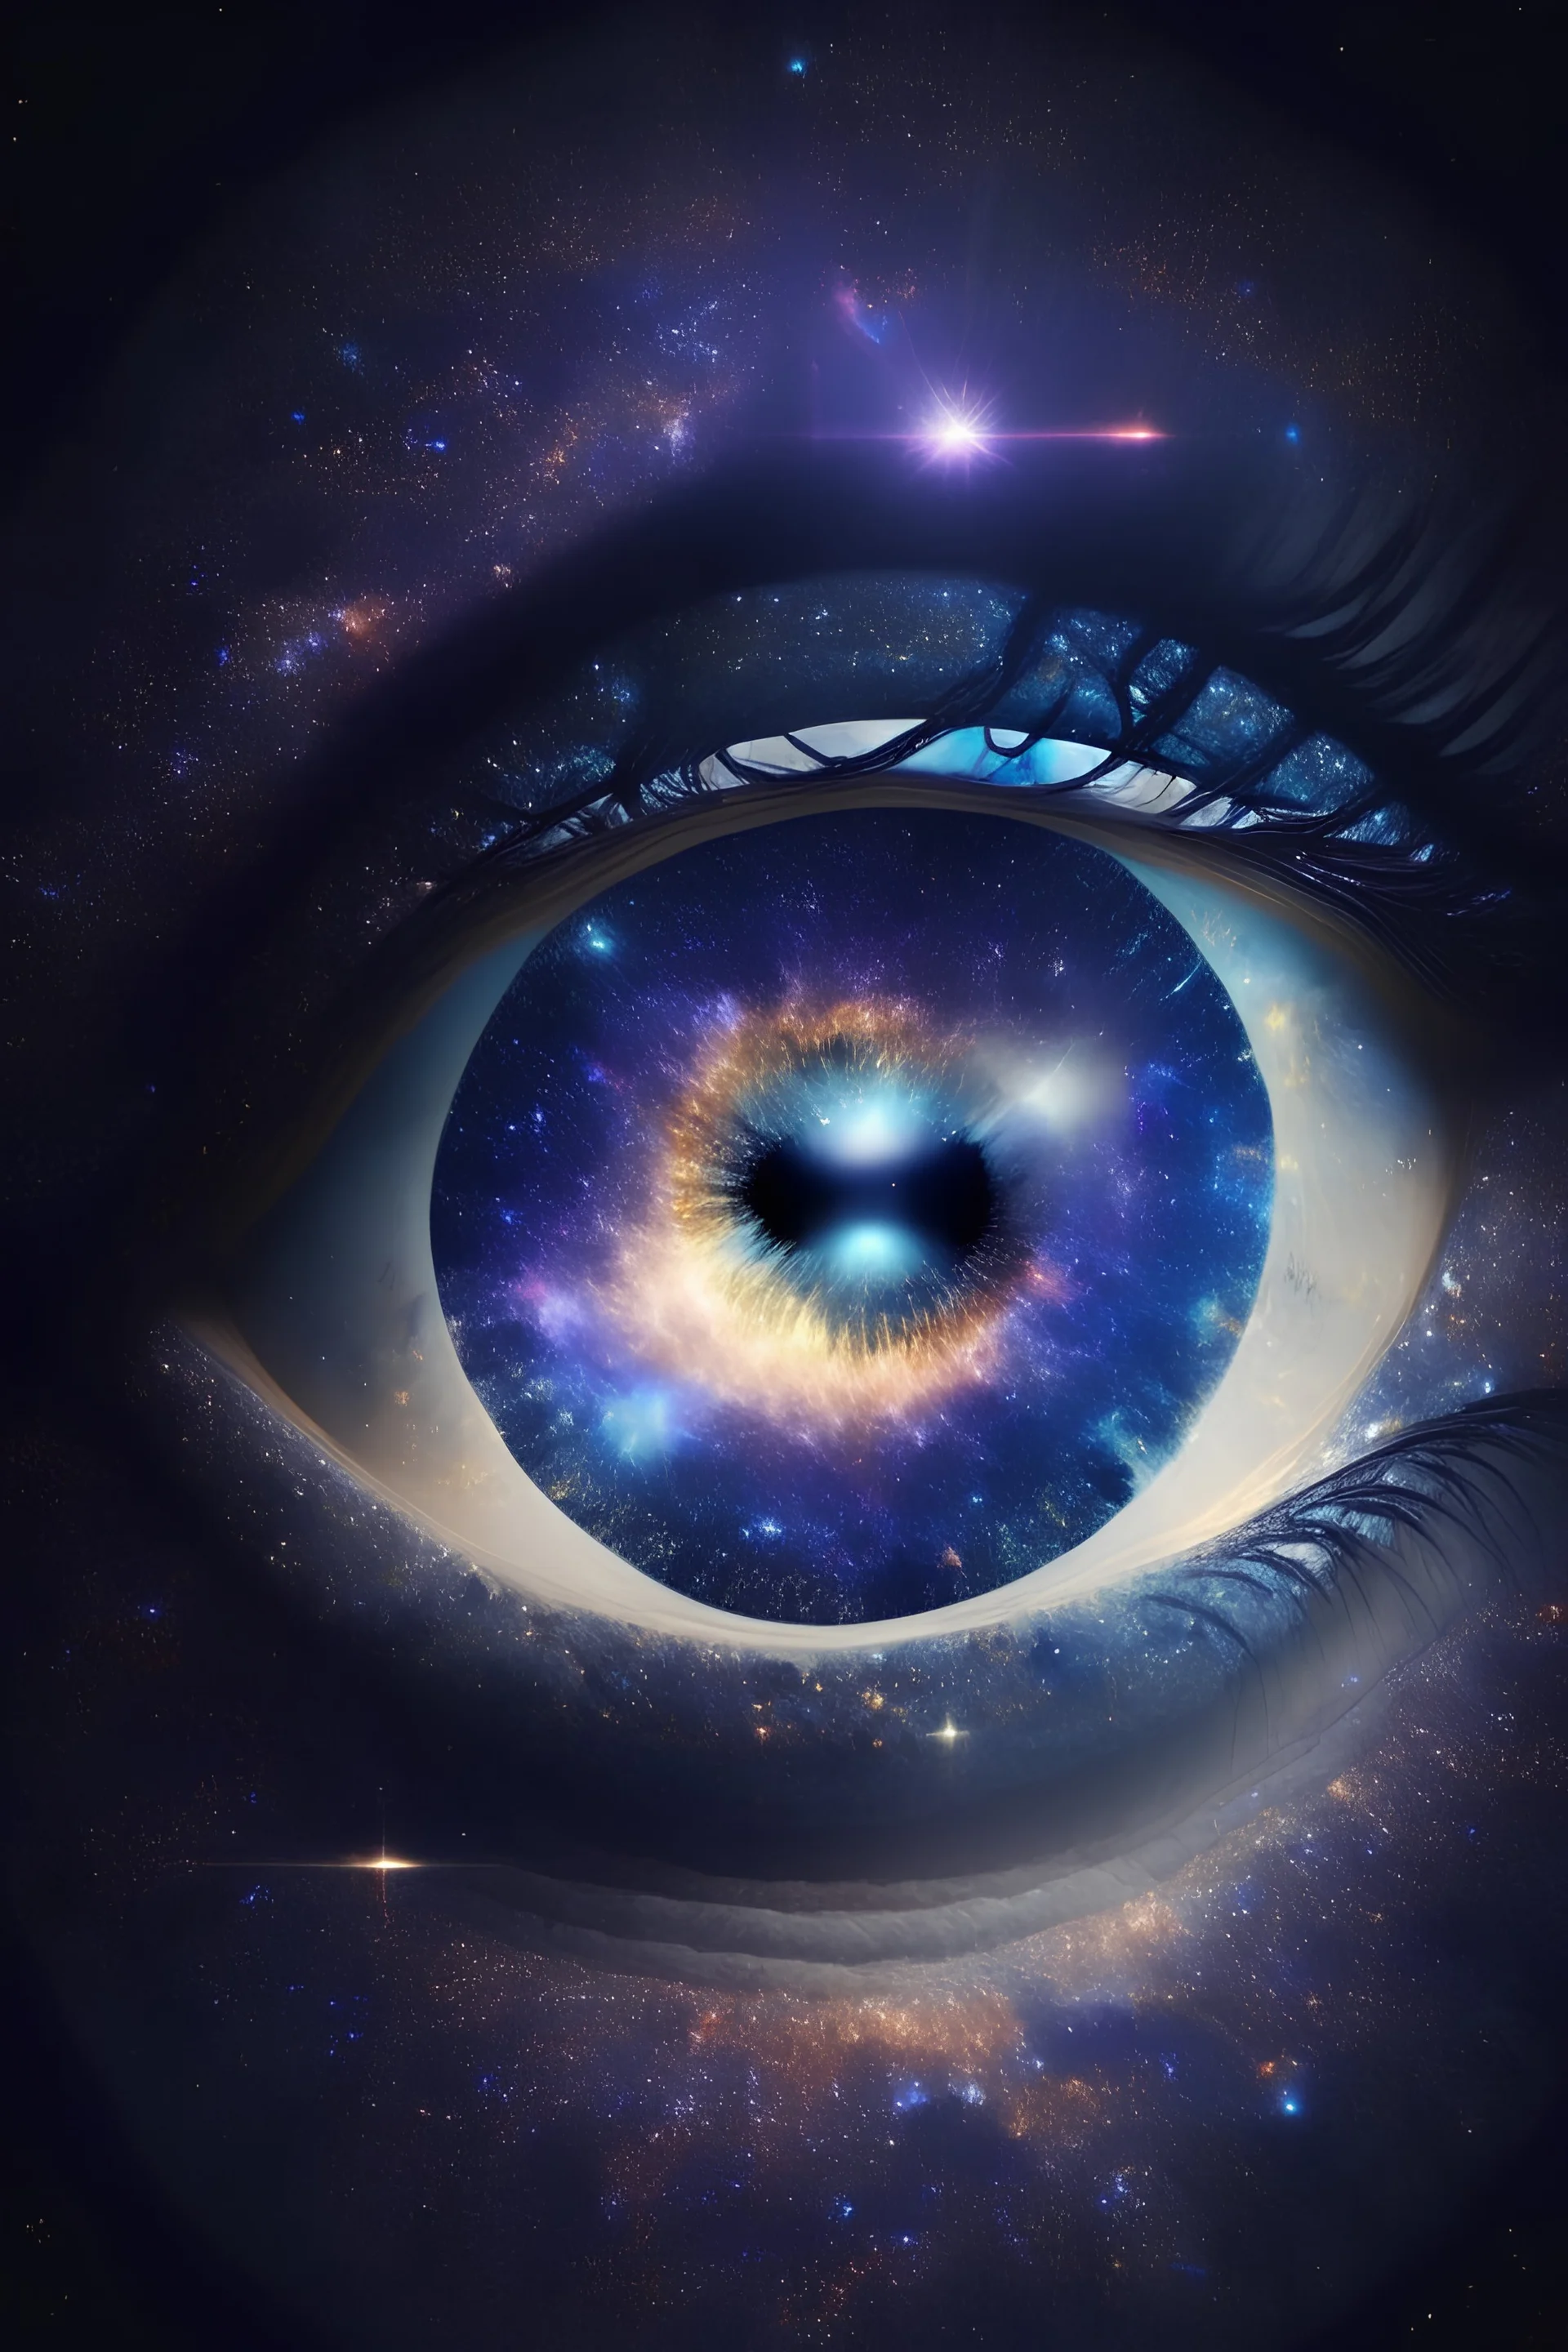 Mystical eye in space sorounded by starlight sparkles